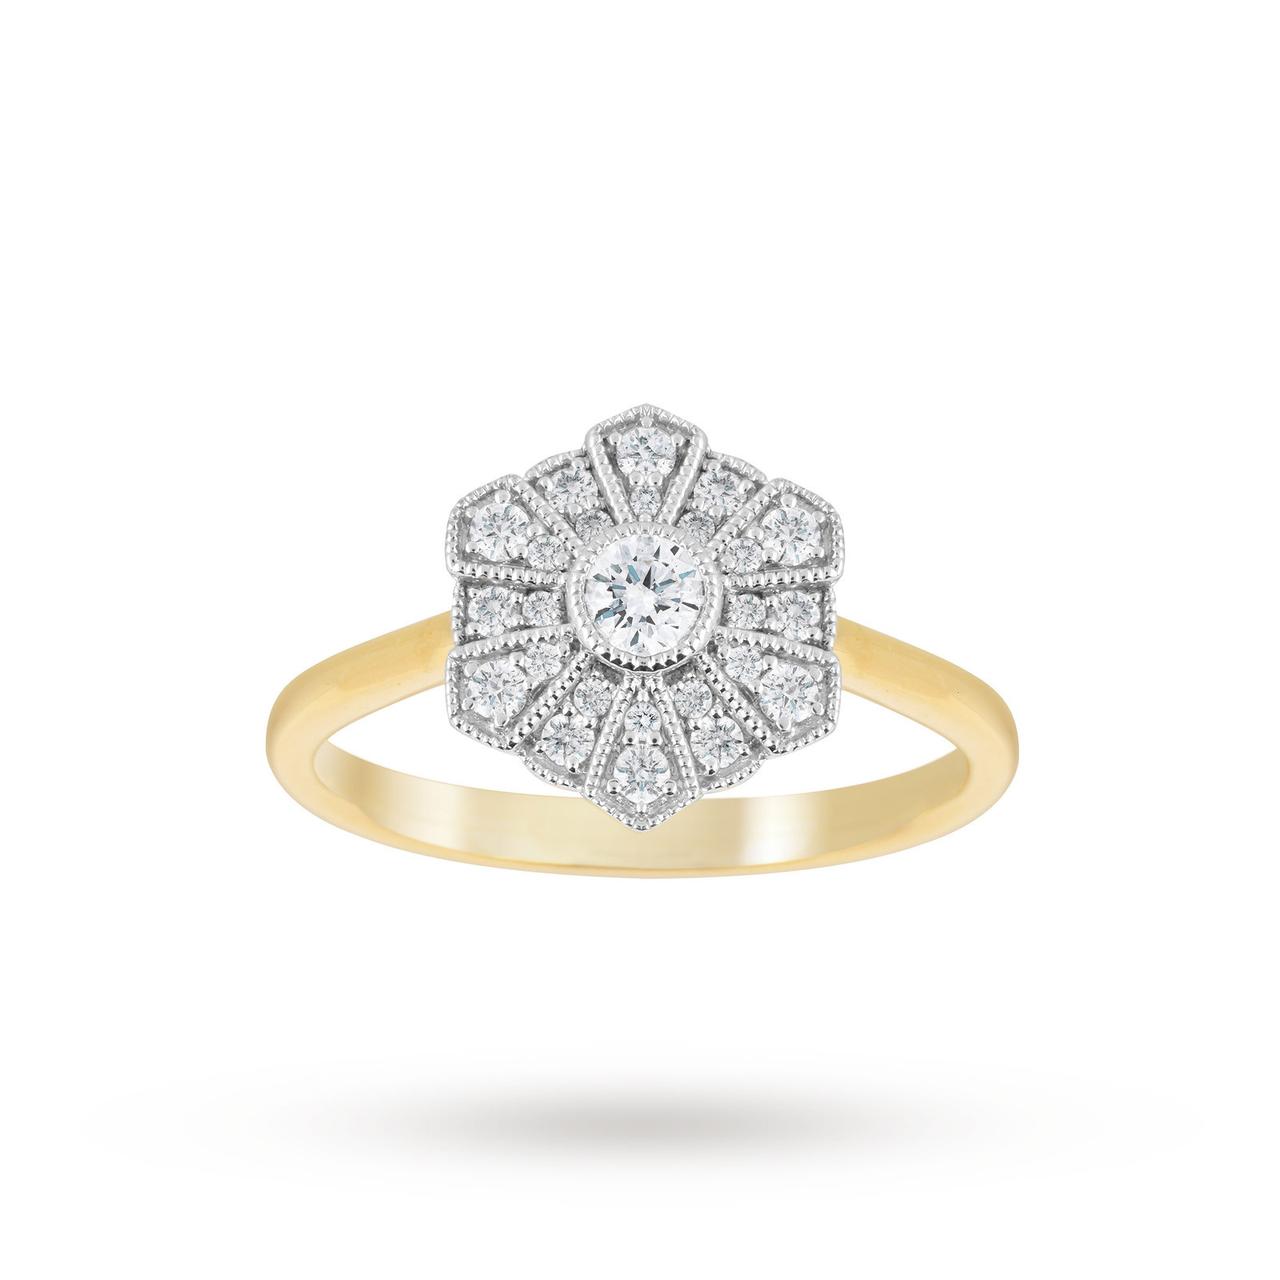 Engagement Rings: How-to-Buy Guide | Beaverbrooks